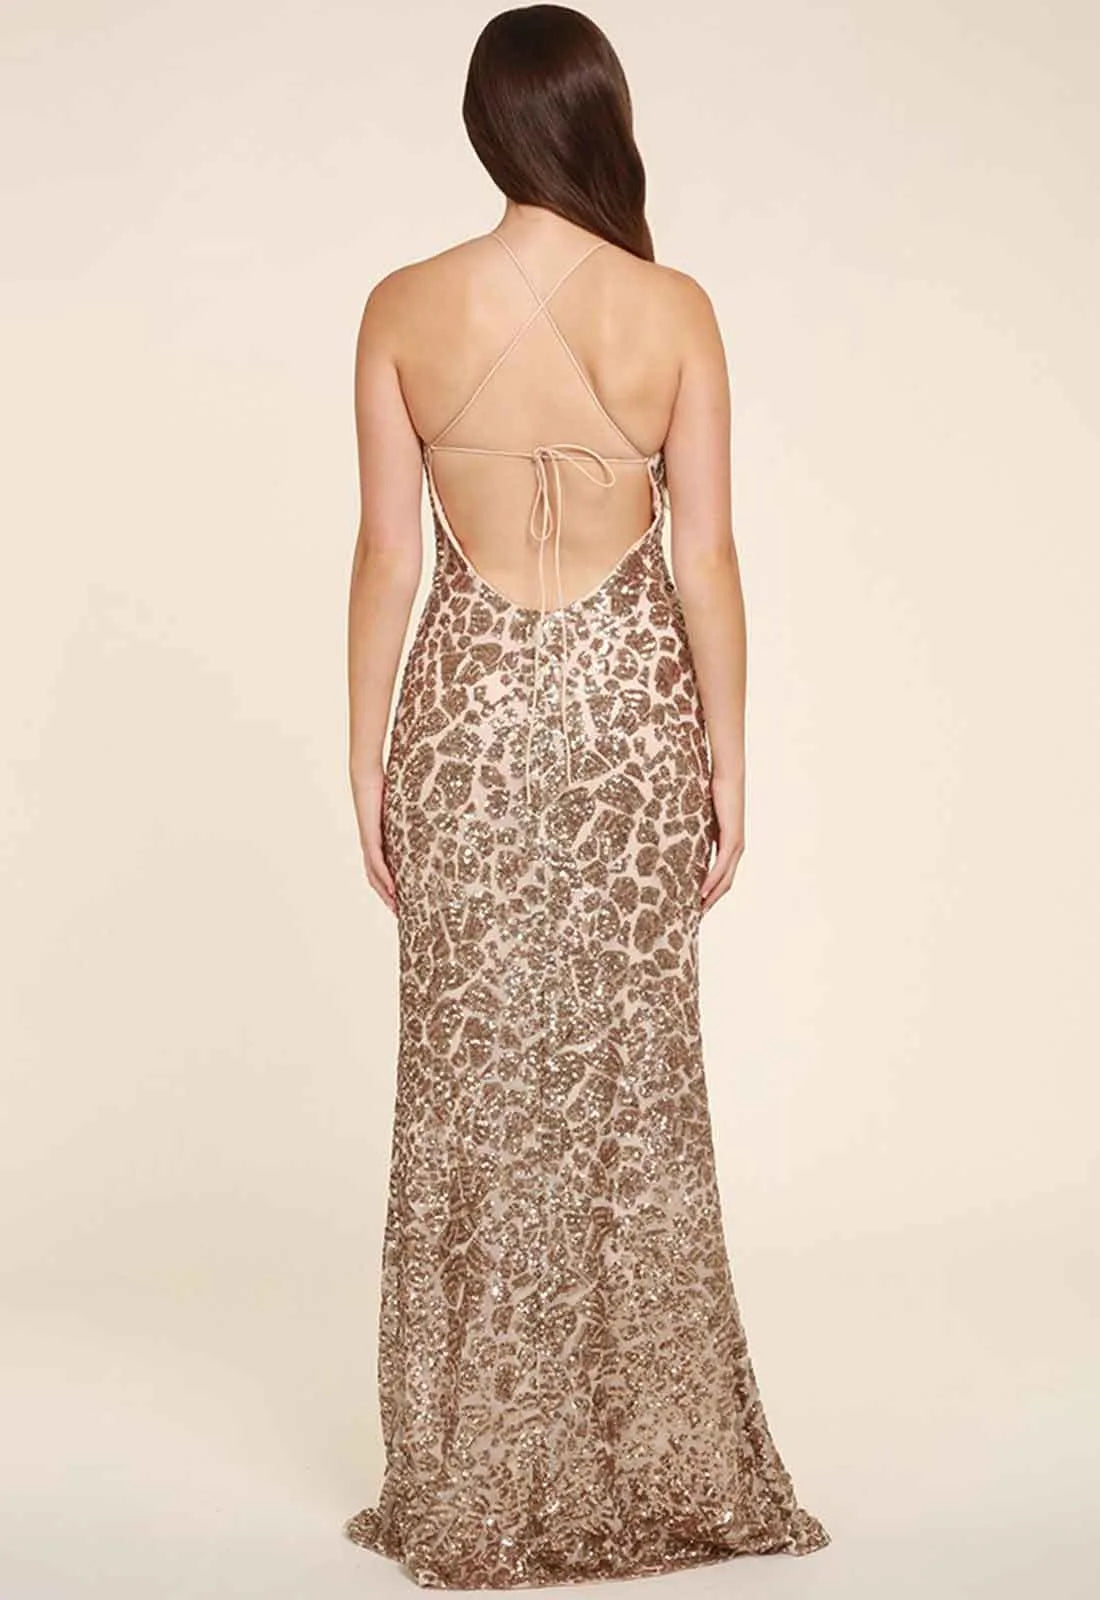 Honor Gold Harley Sparkle Sequin Maxi in Gold-16329